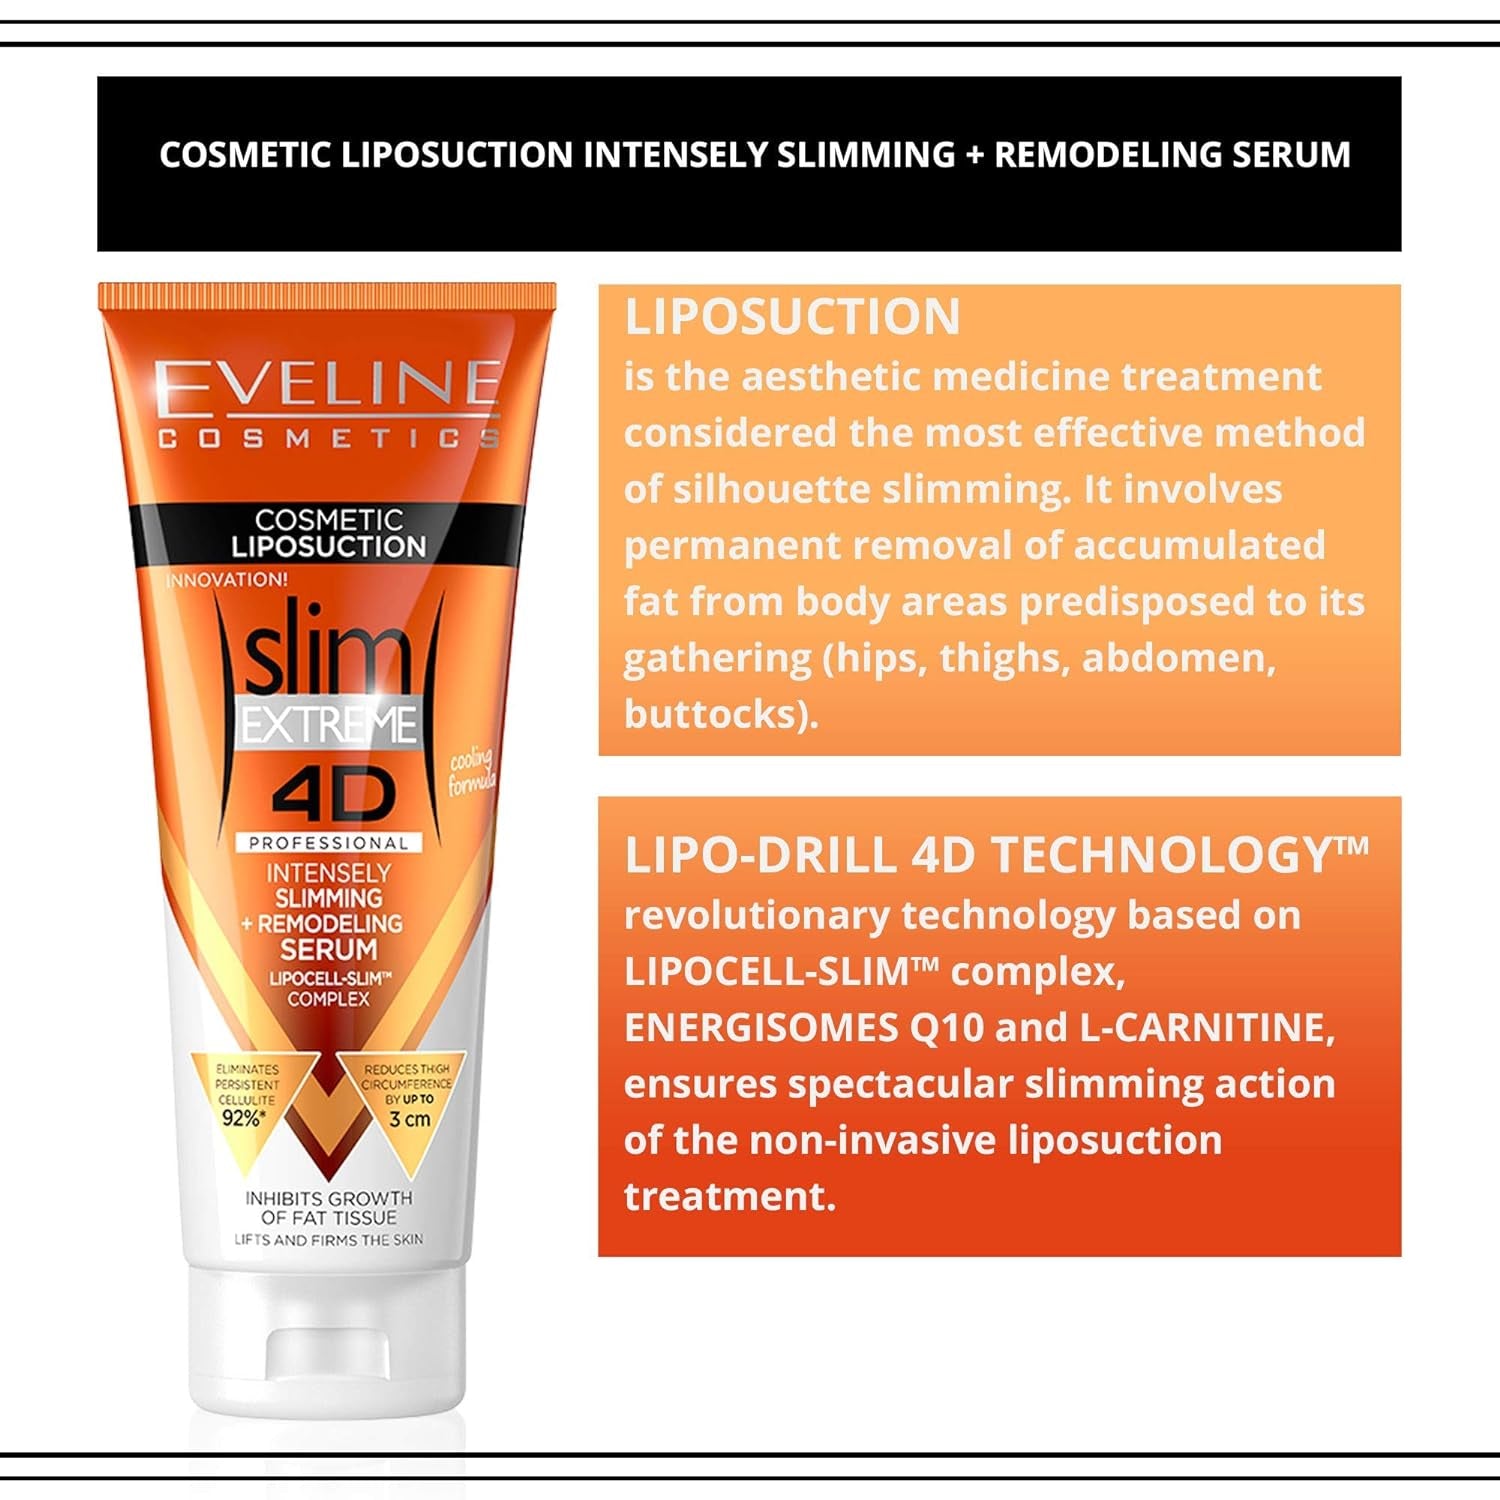 "Get the Body You've Always Wanted with Eveline Slim Extreme 4D Liposuction Body Serum - Firming Body Lotion for Women and Men, plus Body Sculpting Cellulite Workout Cream!"